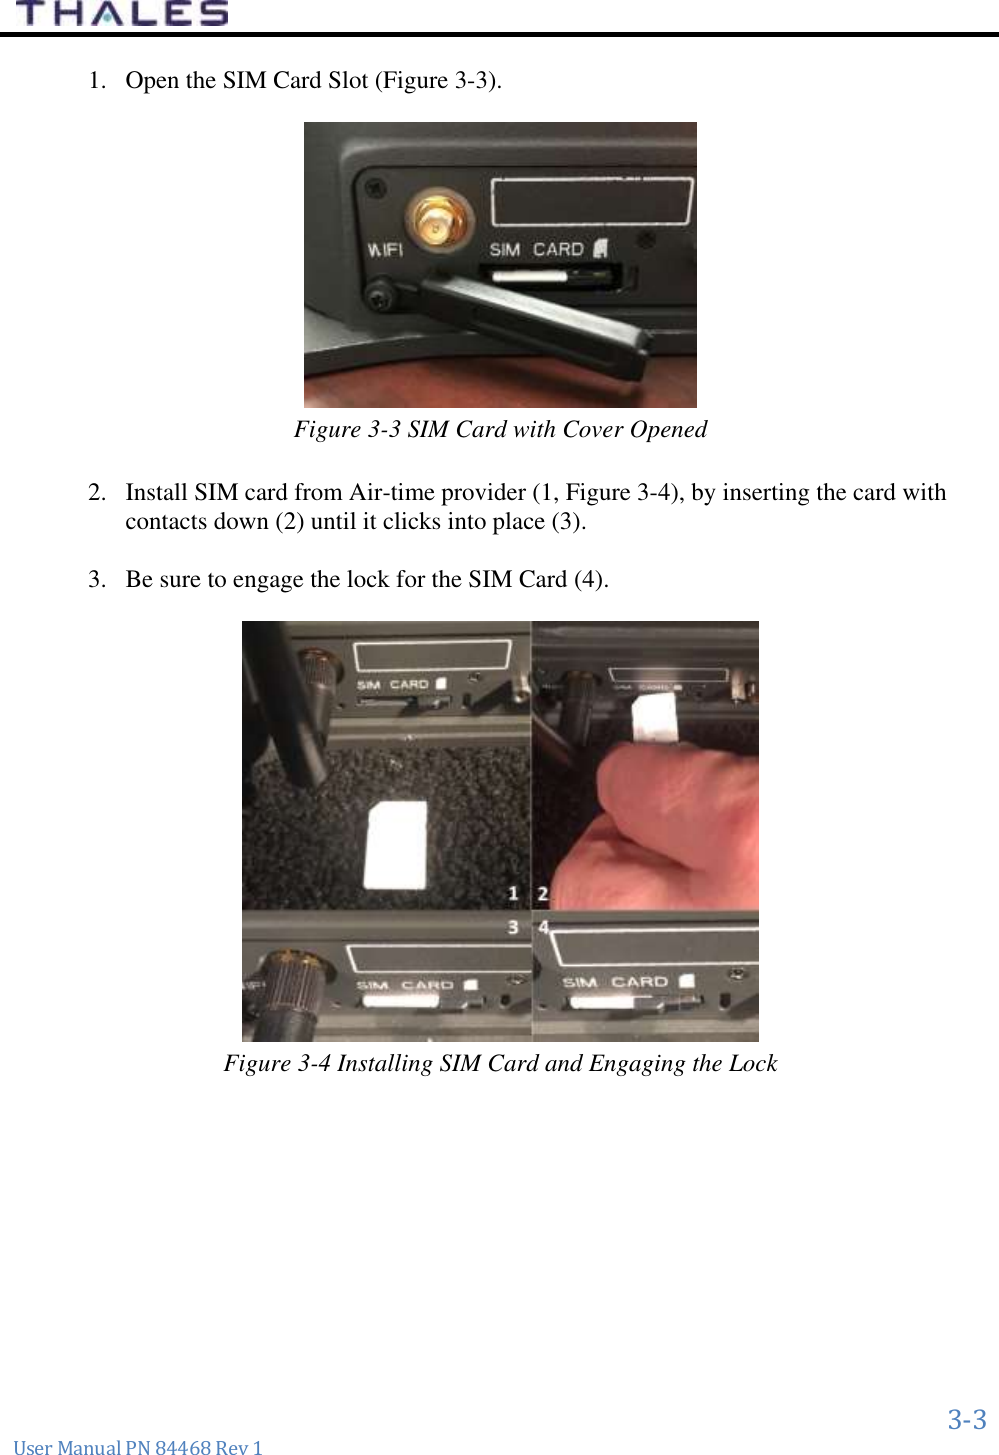      3-3 User Manual PN 84468 Rev 1 1. Open the SIM Card Slot (Figure 3-3).   Figure 3-3 SIM Card with Cover Opened  2. Install SIM card from Air-time provider (1, Figure 3-4), by inserting the card with contacts down (2) until it clicks into place (3).  3. Be sure to engage the lock for the SIM Card (4).   Figure 3-4 Installing SIM Card and Engaging the Lock     